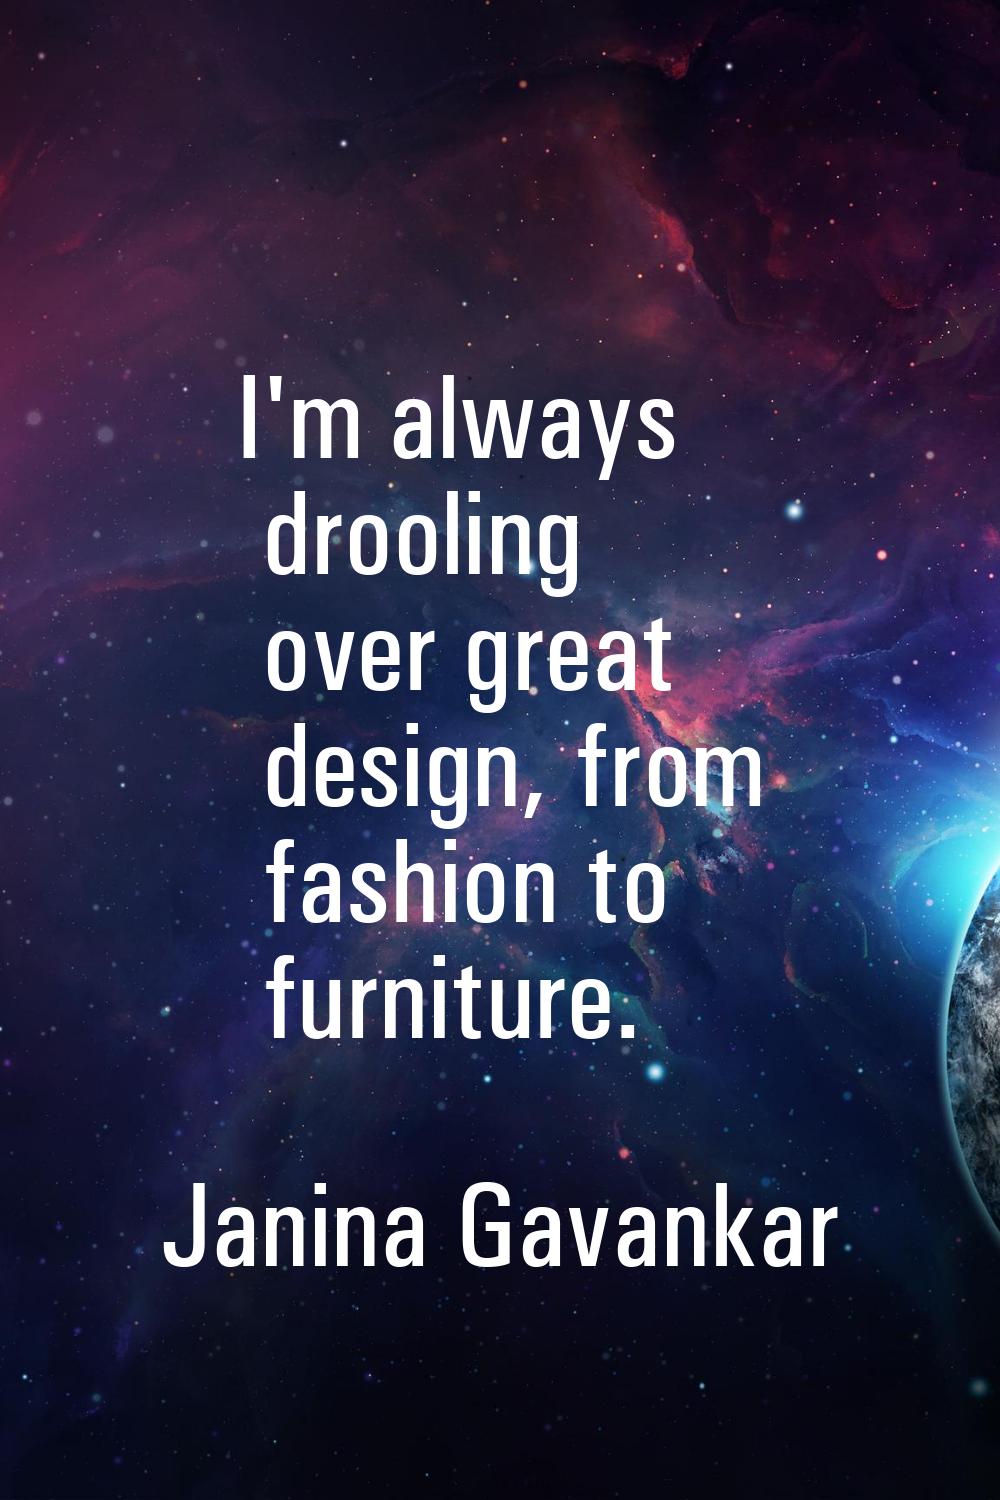 I'm always drooling over great design, from fashion to furniture.